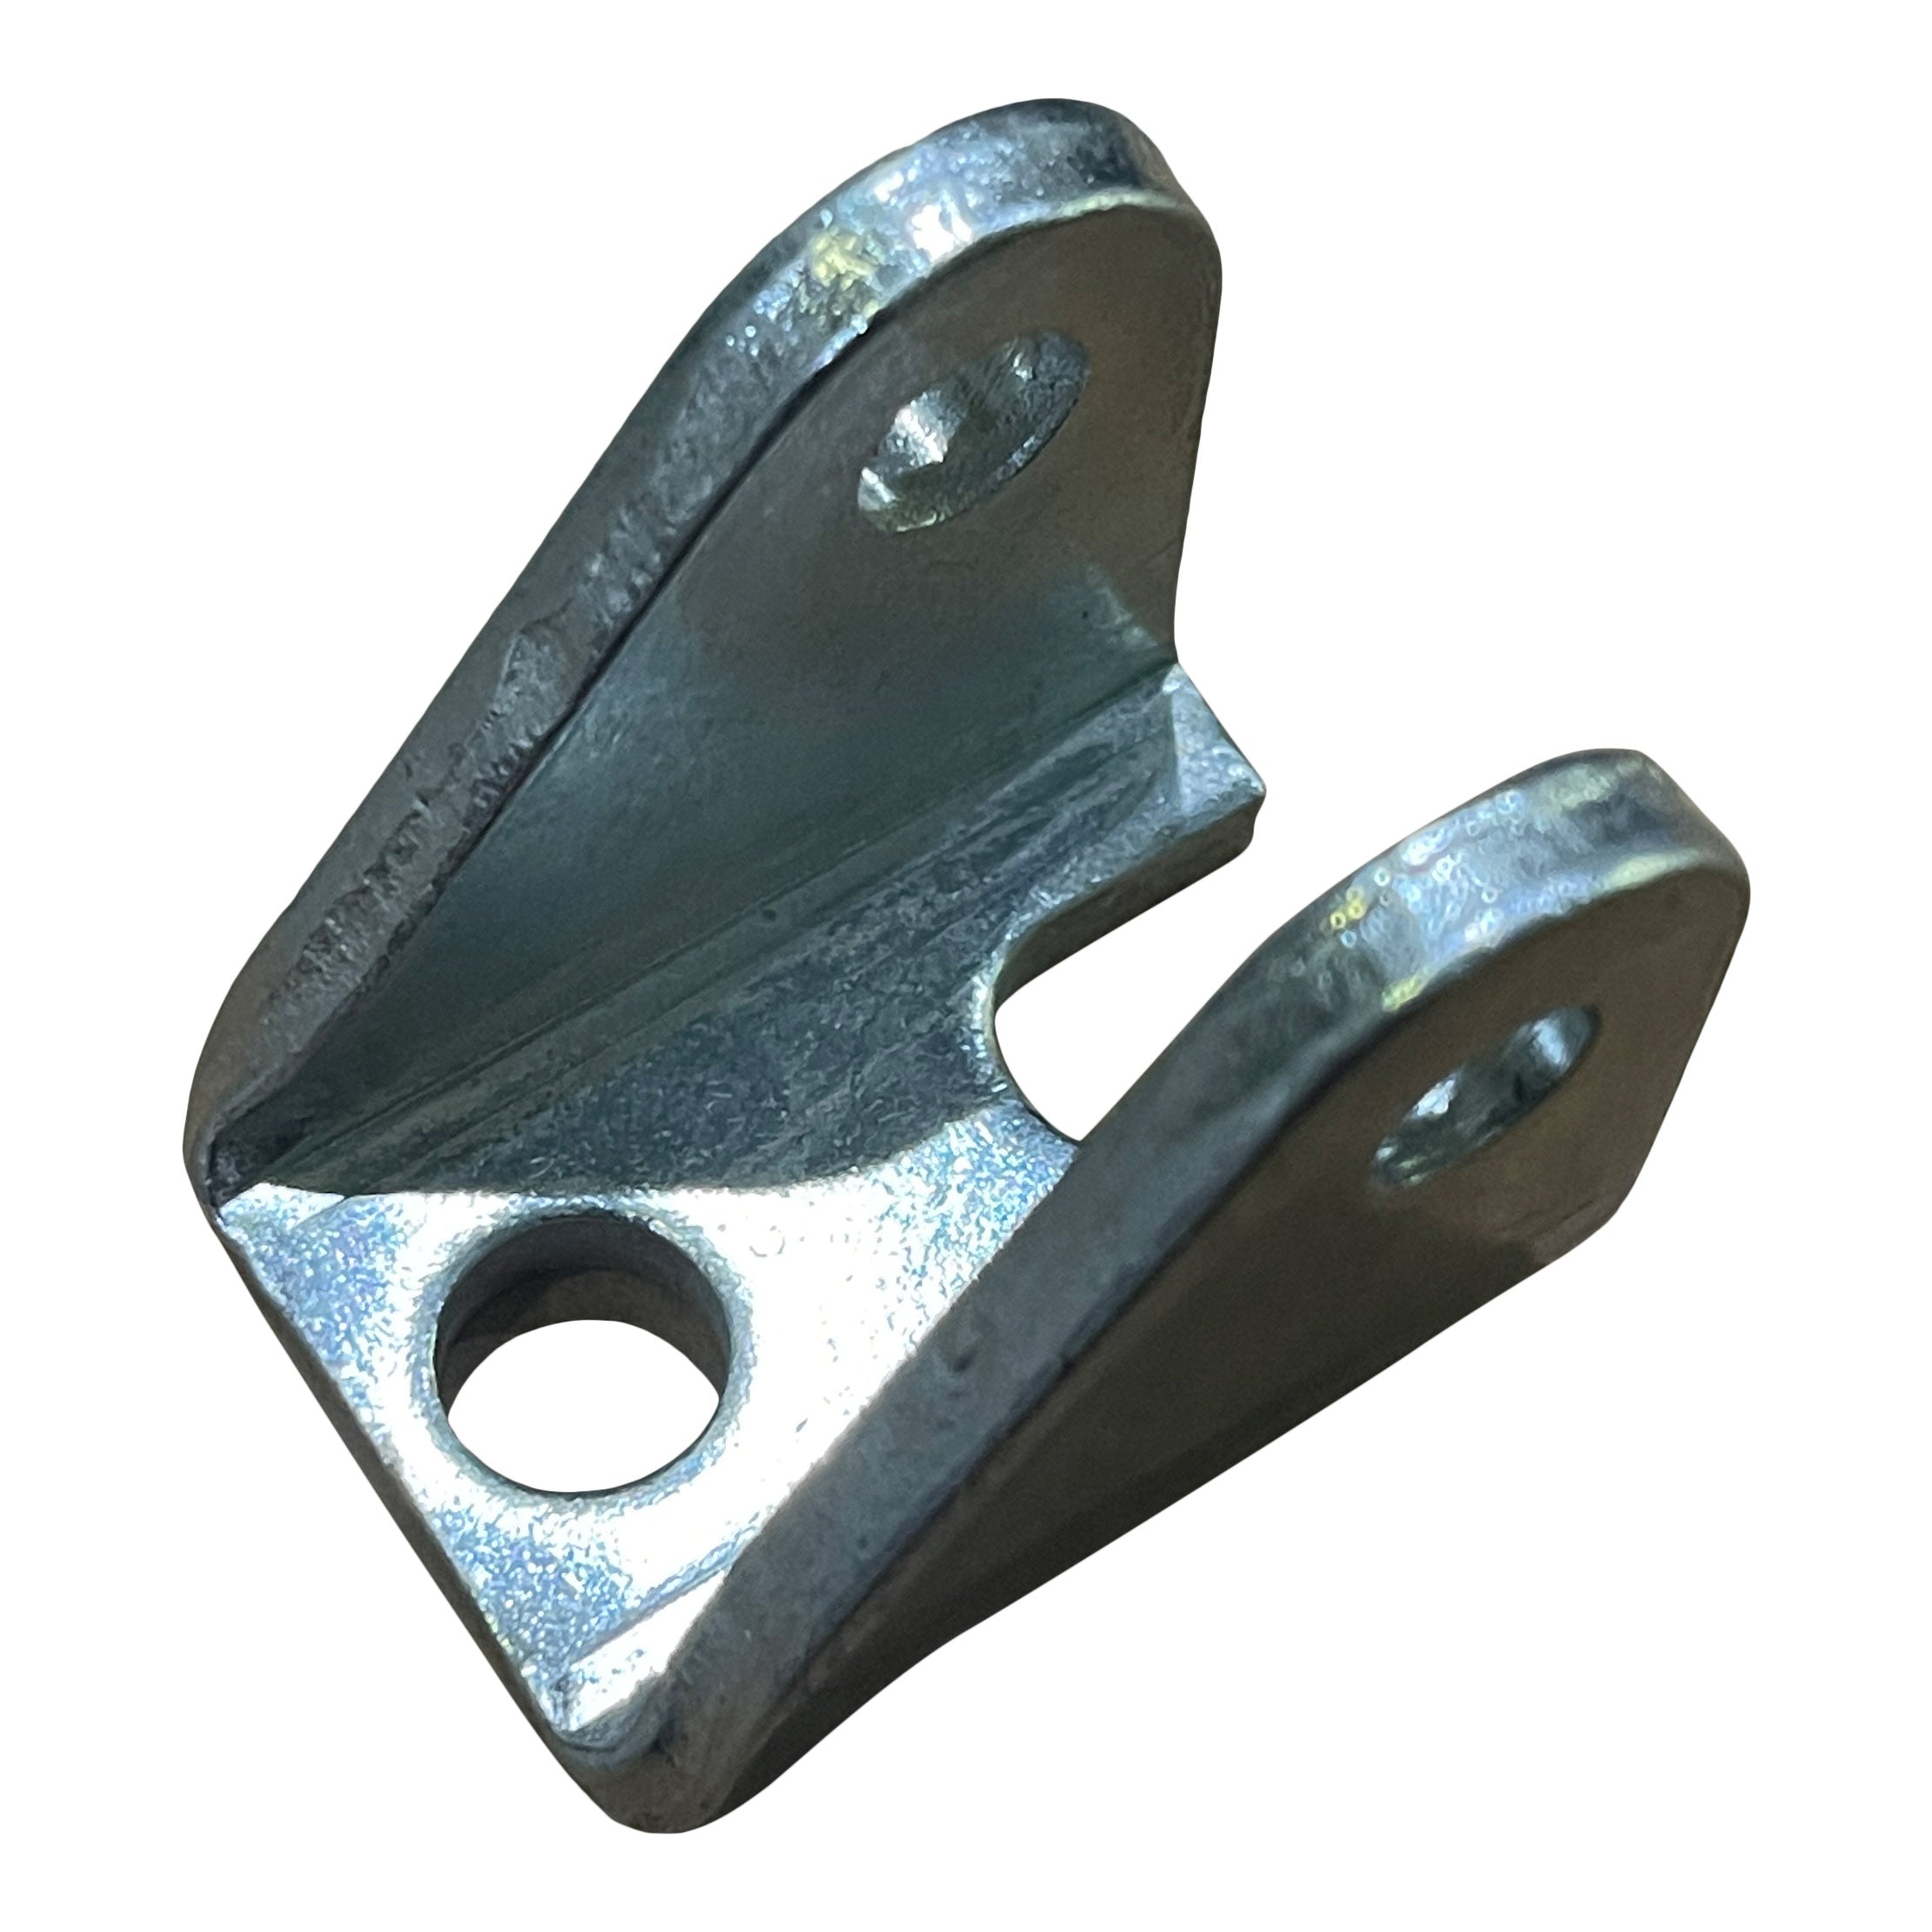 MB17 Mounting Bracket For Super Duty Actuators Product Image